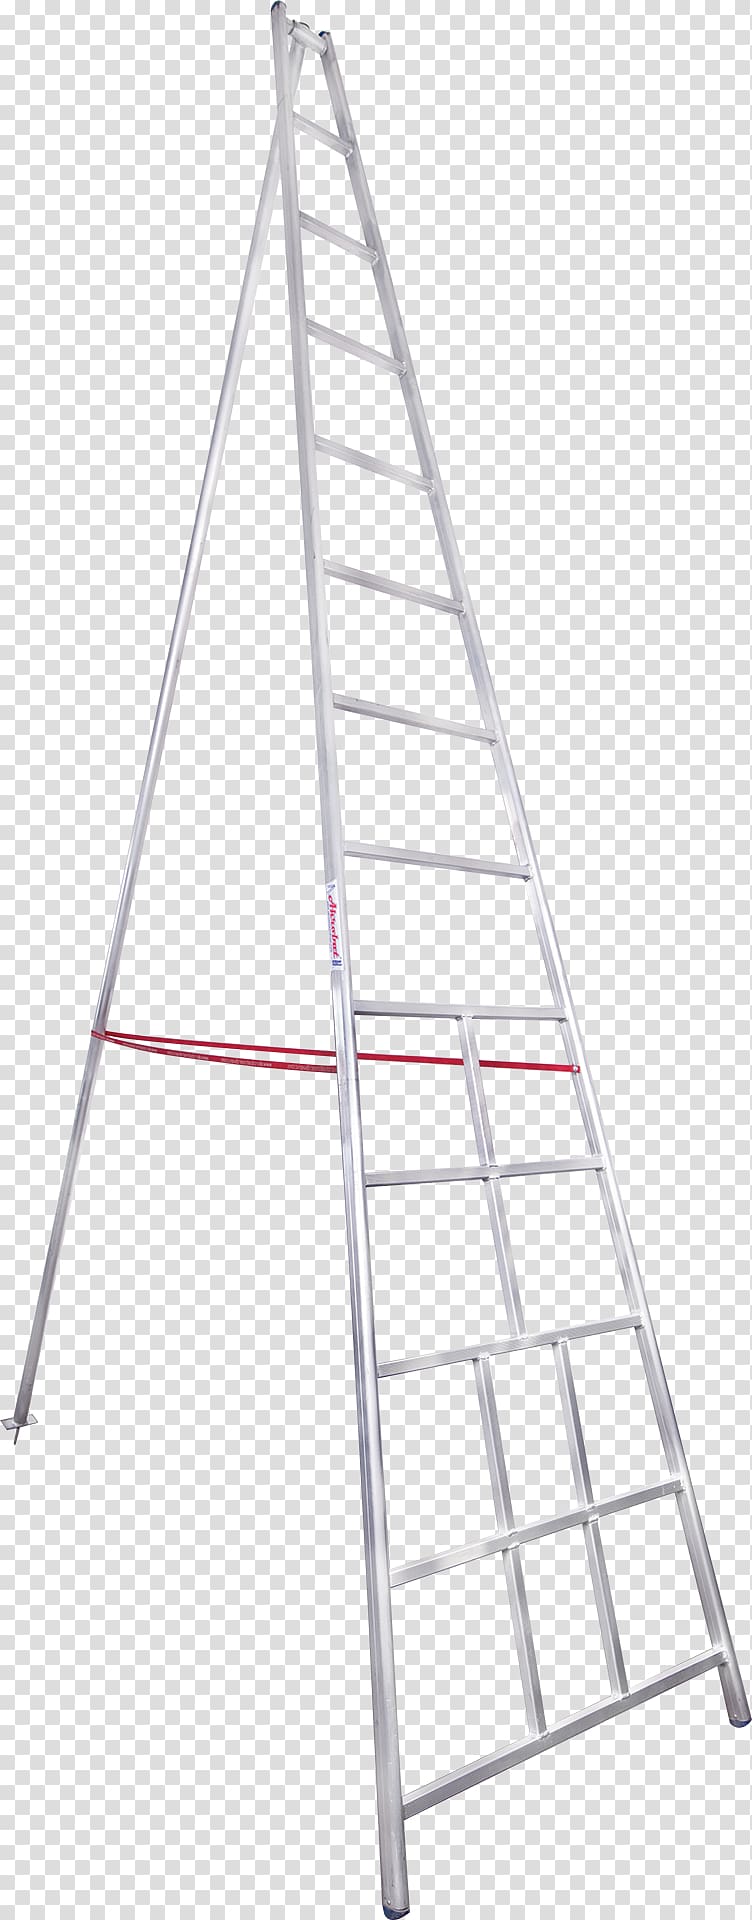 Ladder Stairs Foot Fruit tree, ladder transparent background PNG clipart